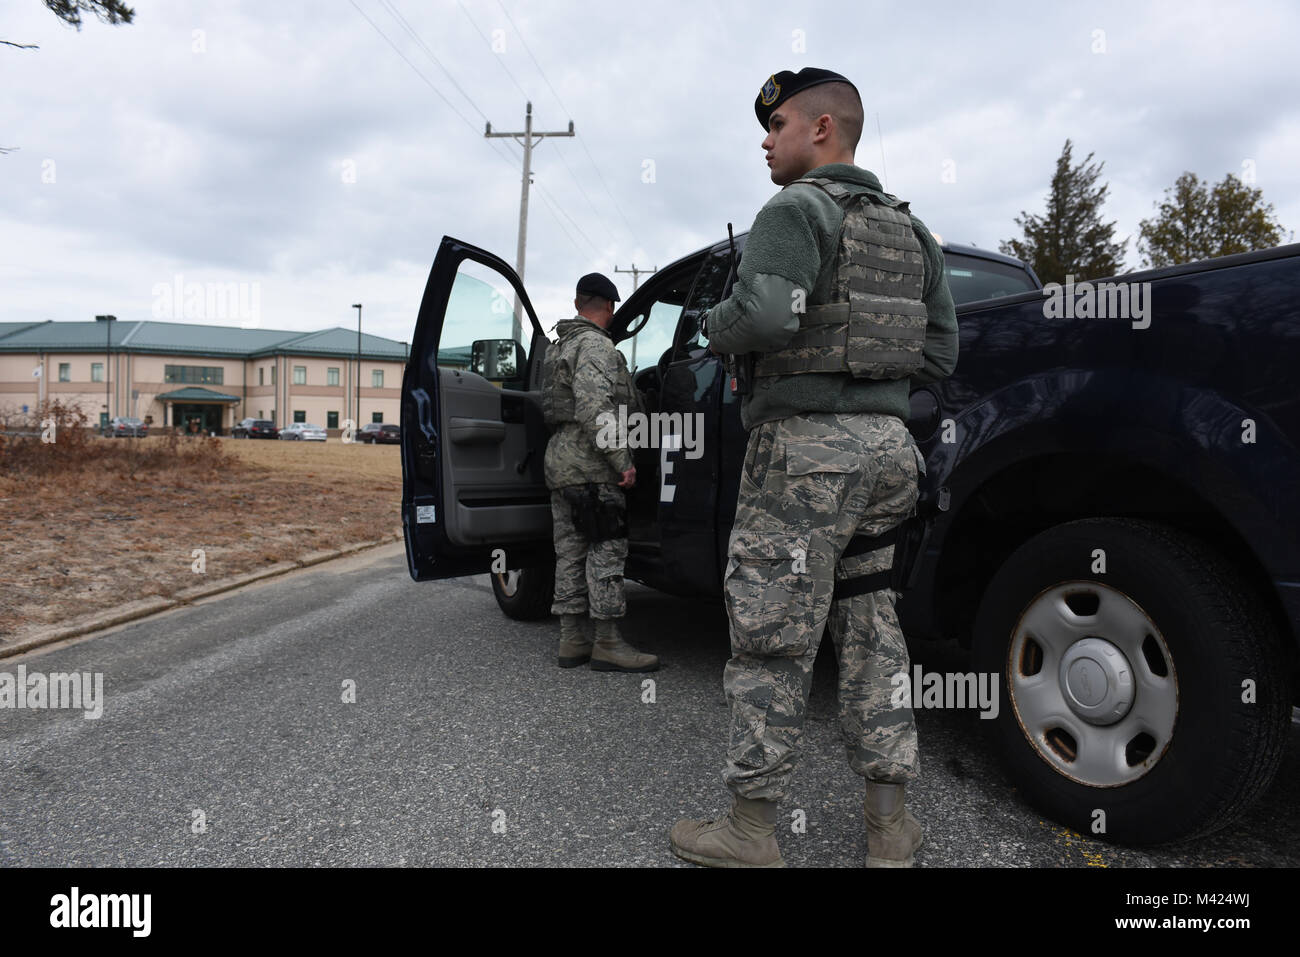 Members assigned to the 102nd Security Forces Squadron participate in an active shooter exercise on Feb. 10, 2018 at Otis Air National Guard Base, Mass. The exercise was designed to simulate the chaotic nature of a disgruntled person entering a facility on base and opening fire. Airmen from the 102nd SFS responded quickly to the incident and worked together to clear rooms and isolate where the shooter was. The 102nd Intelligence Wing Inspector General team stressed that knowing how to react to situations like active shooters is crucial for all members on base. Stock Photo